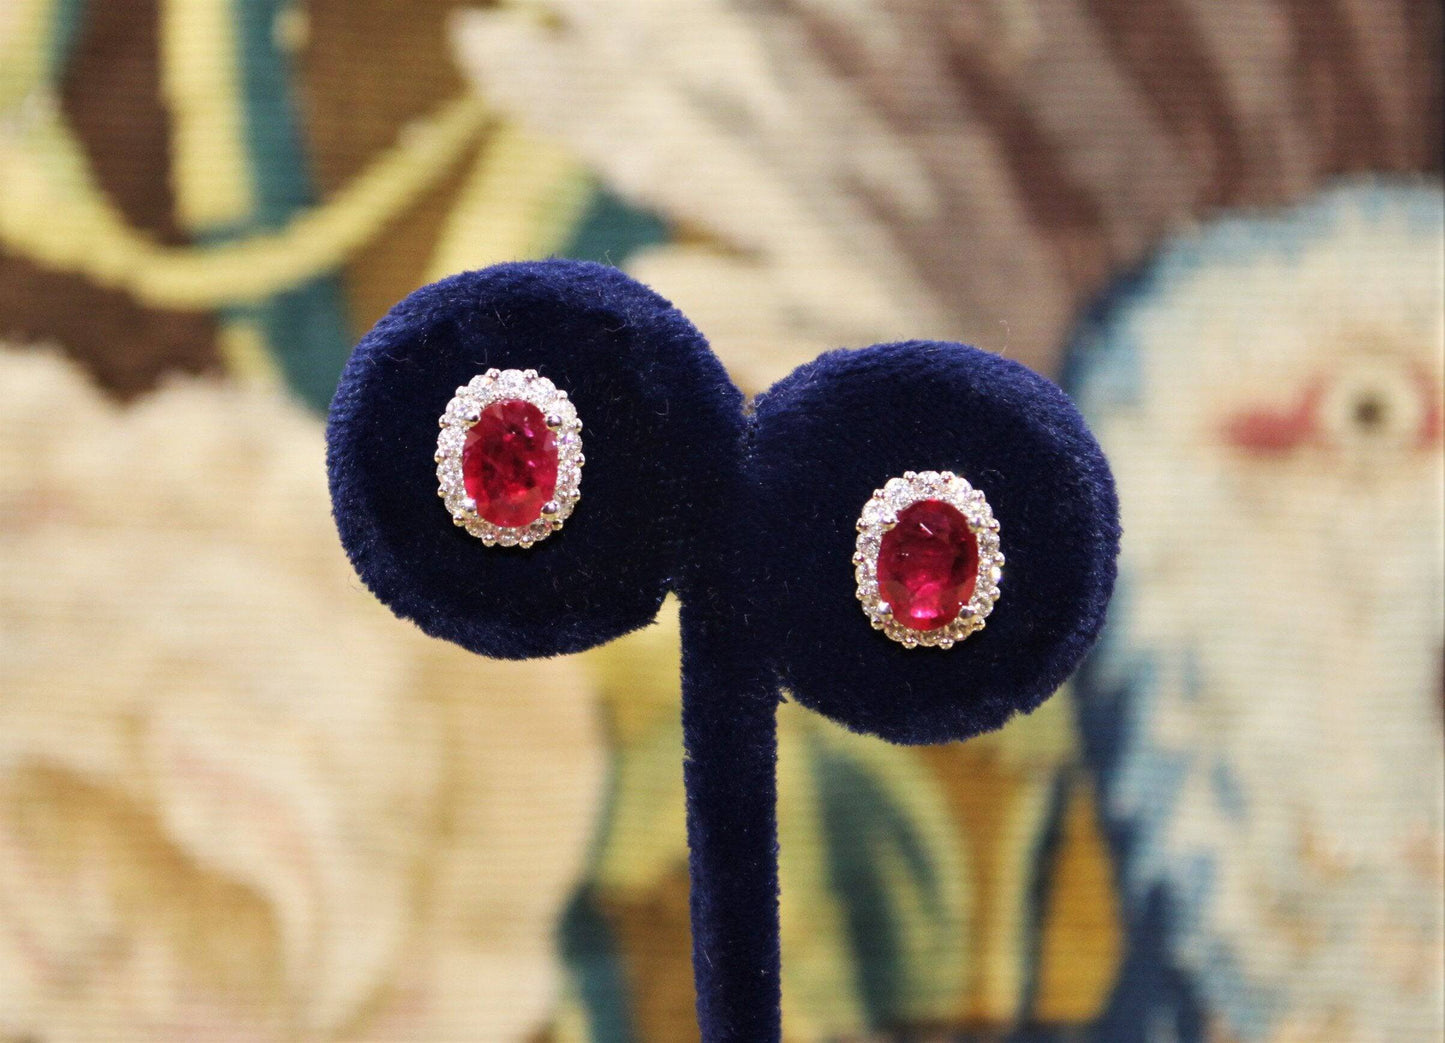 A fine pair of Oval Ruby & Diamond Earrings set in 18ct White Gold, Circa 1970 - Robin Haydock Antiques